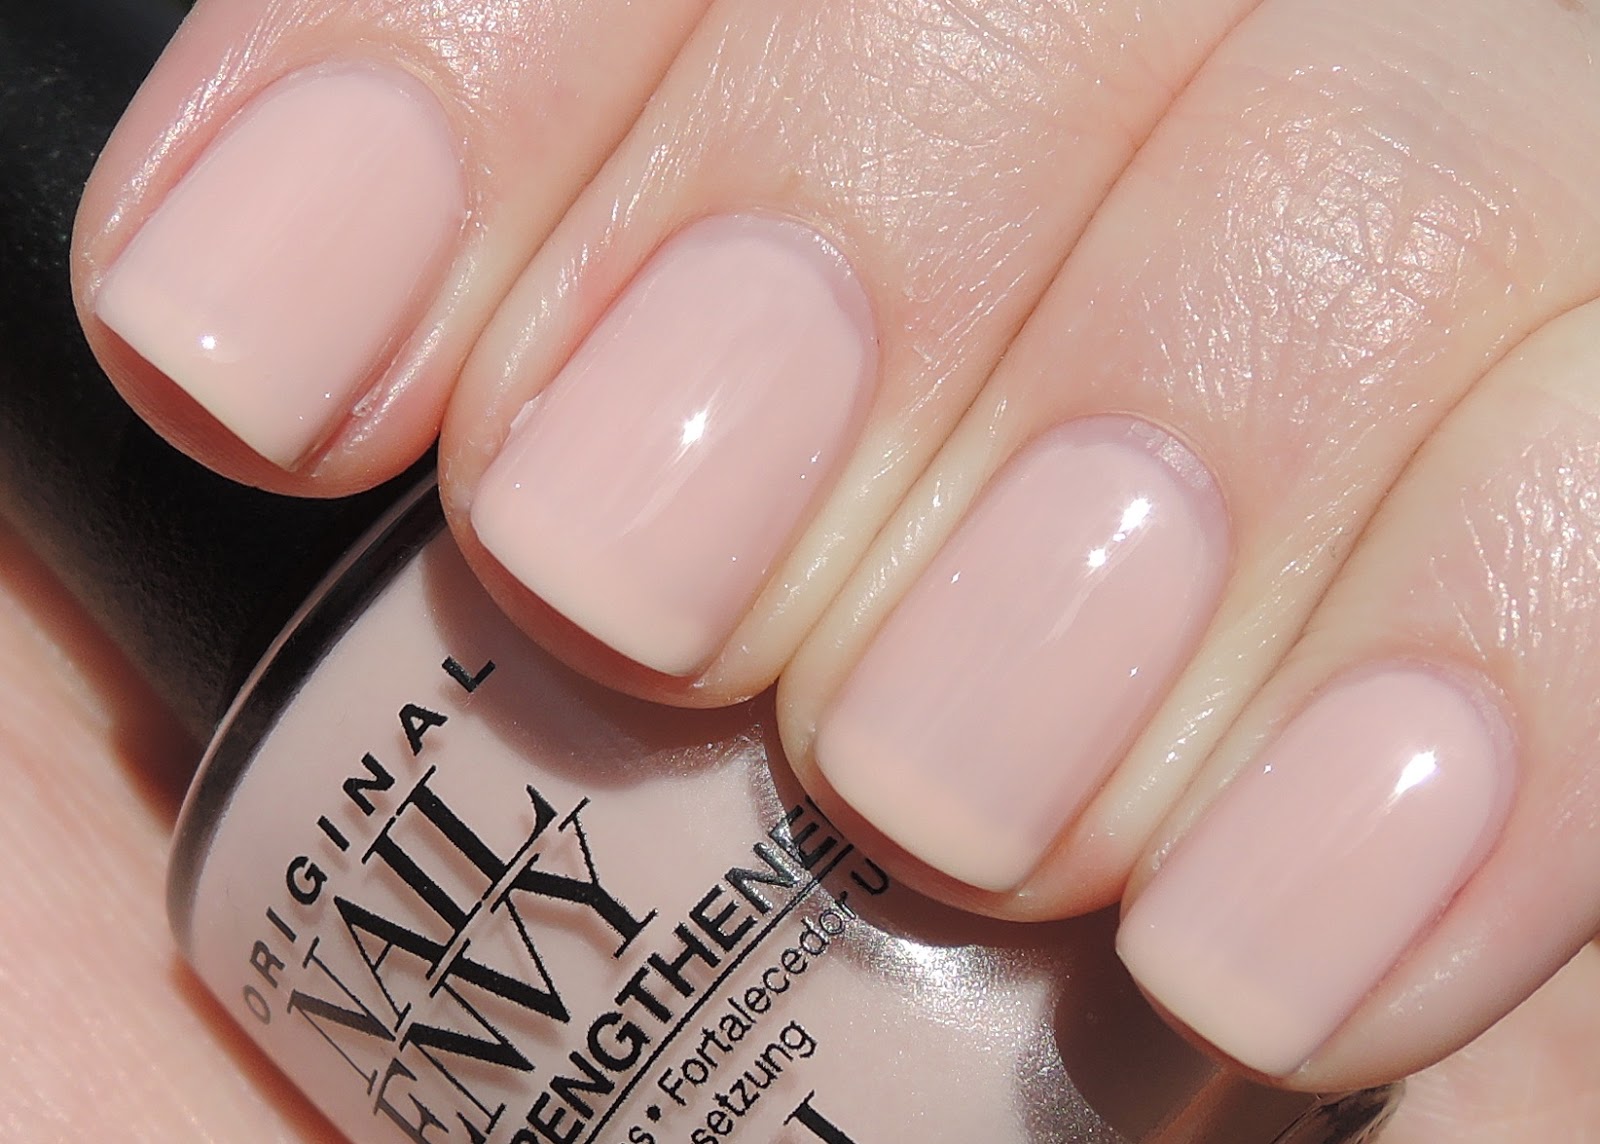 Orly Nail Lacquer in "Canyon Clay" - wide 6